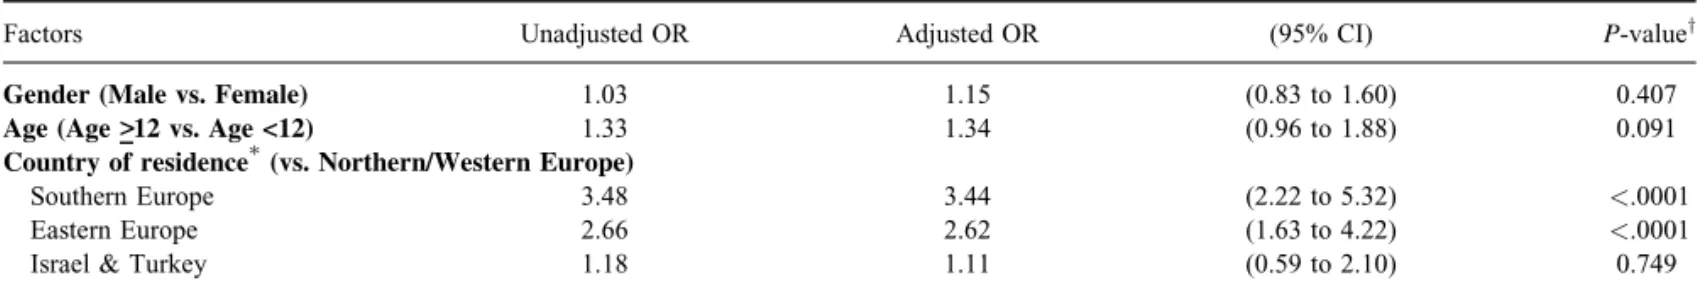 TABLE 4. Final logistic regression model for clarithromycin resistance among pediatric patients not previously treated for Helicobacter pylori infection and no missing data for all of the factors considered in the univariate analysis (n ¼ 801)